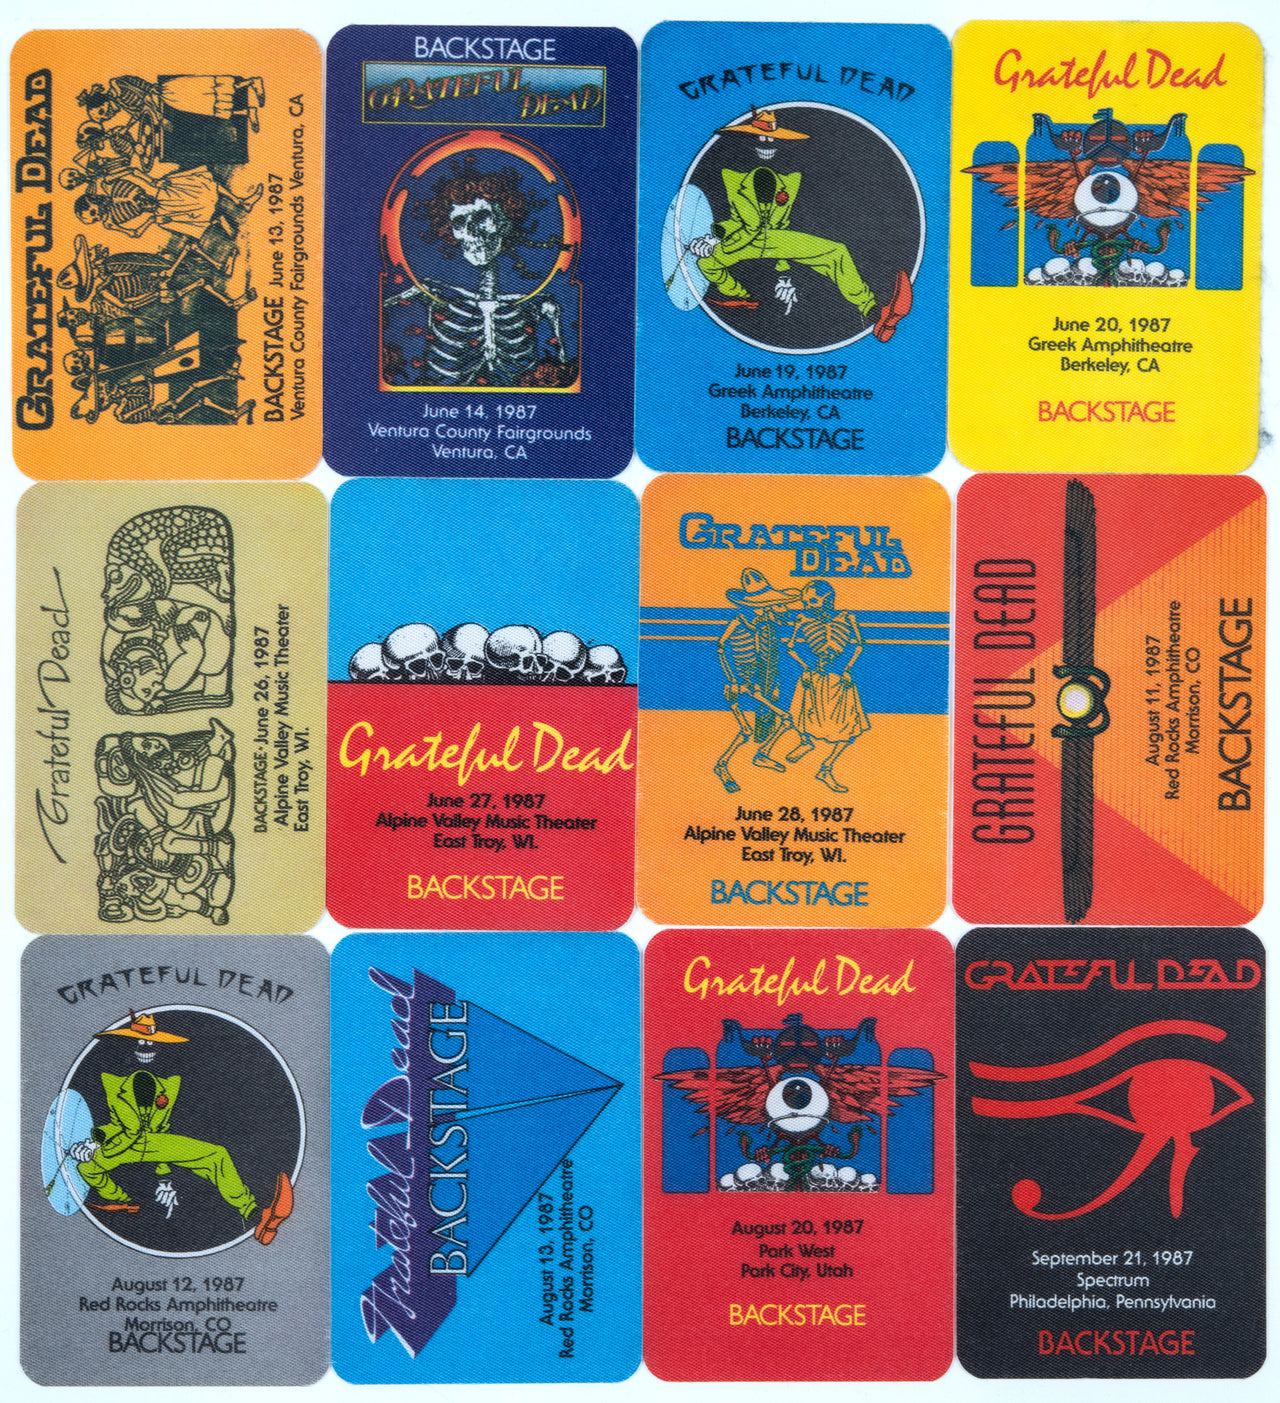 Grateful Dead Backstage Passes (4/9/1987 - 9/21/1987) from Dan Healy